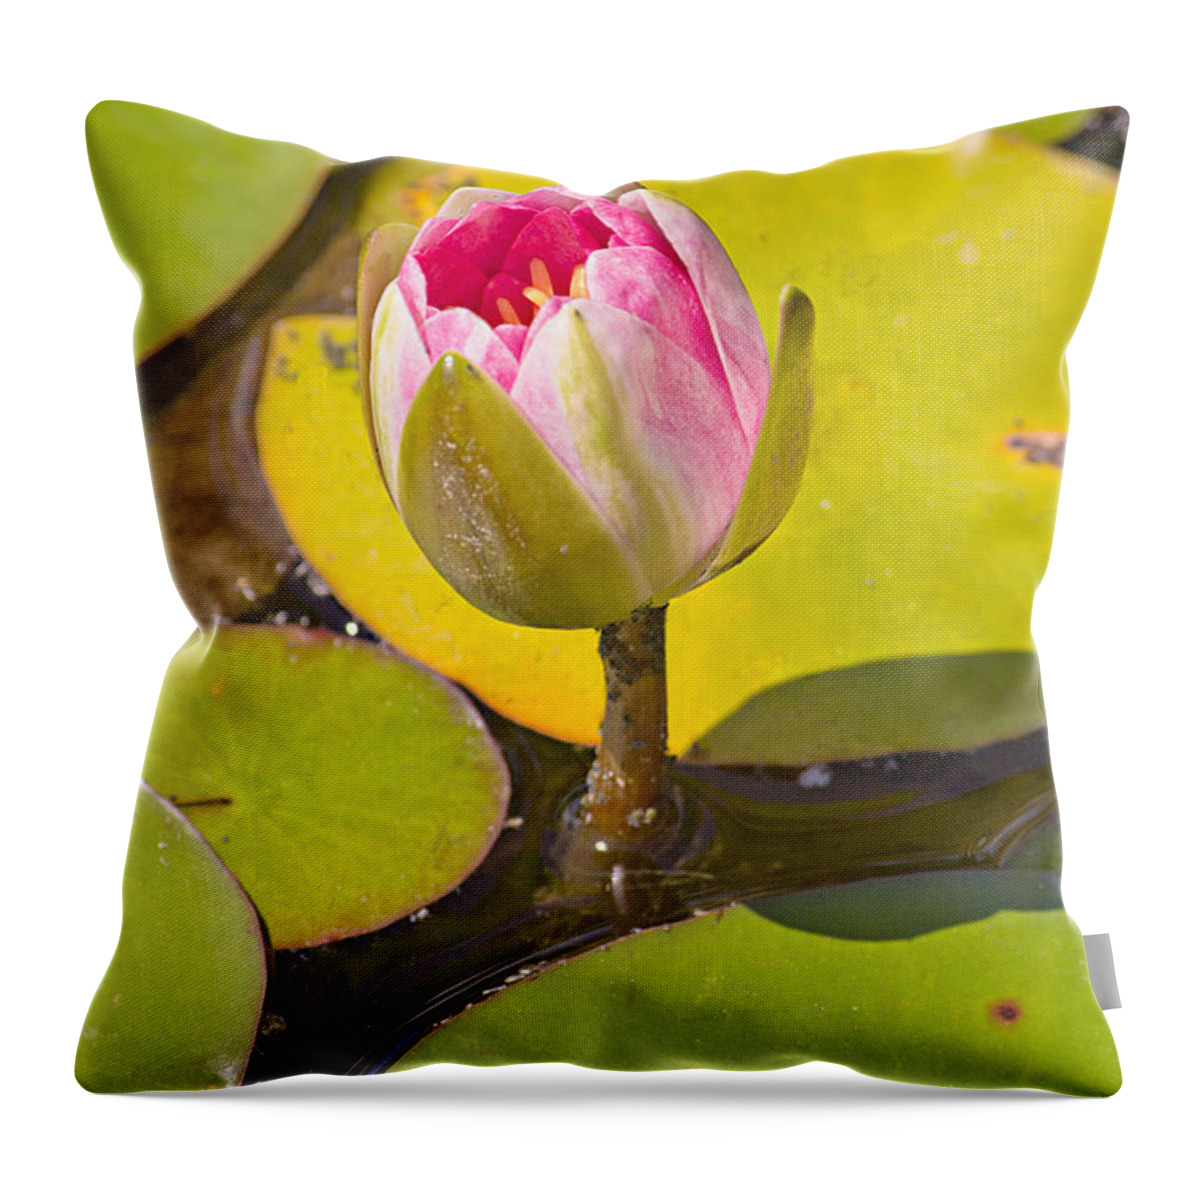 Flower Throw Pillow featuring the photograph About to Bloom by Peter J Sucy